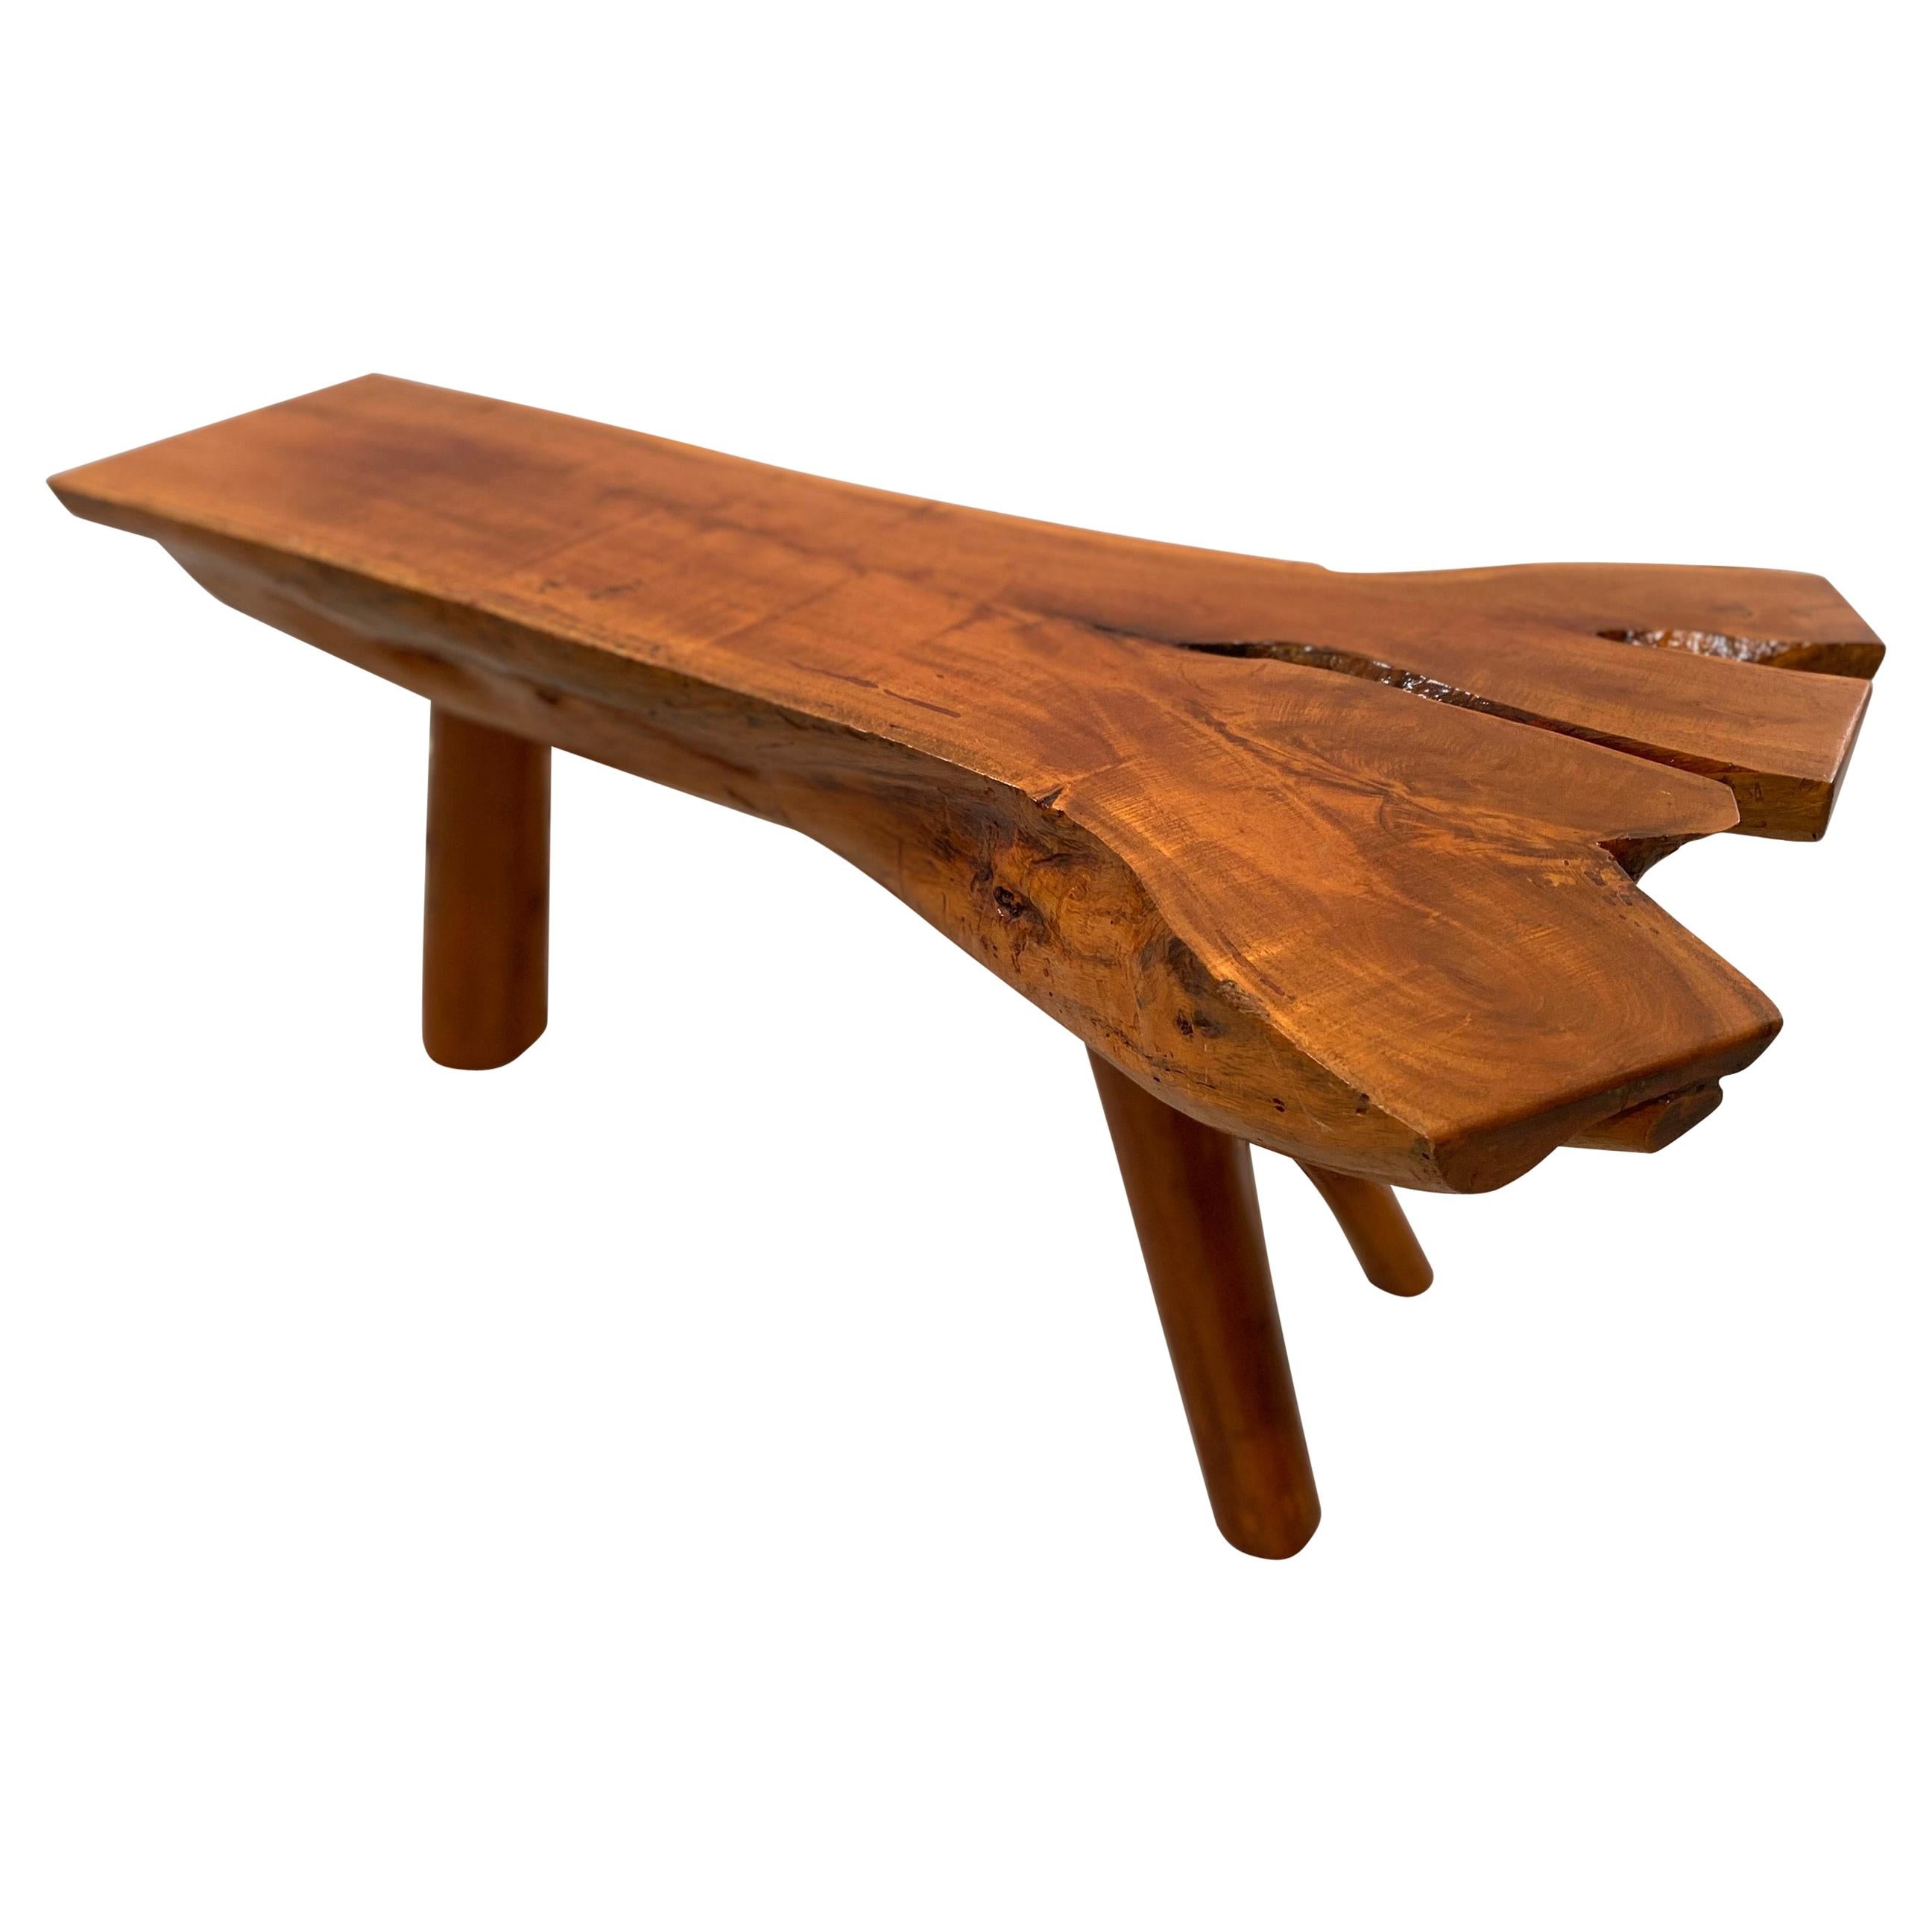 Decorative Split Wood Log Coffee or Side Table or Bench